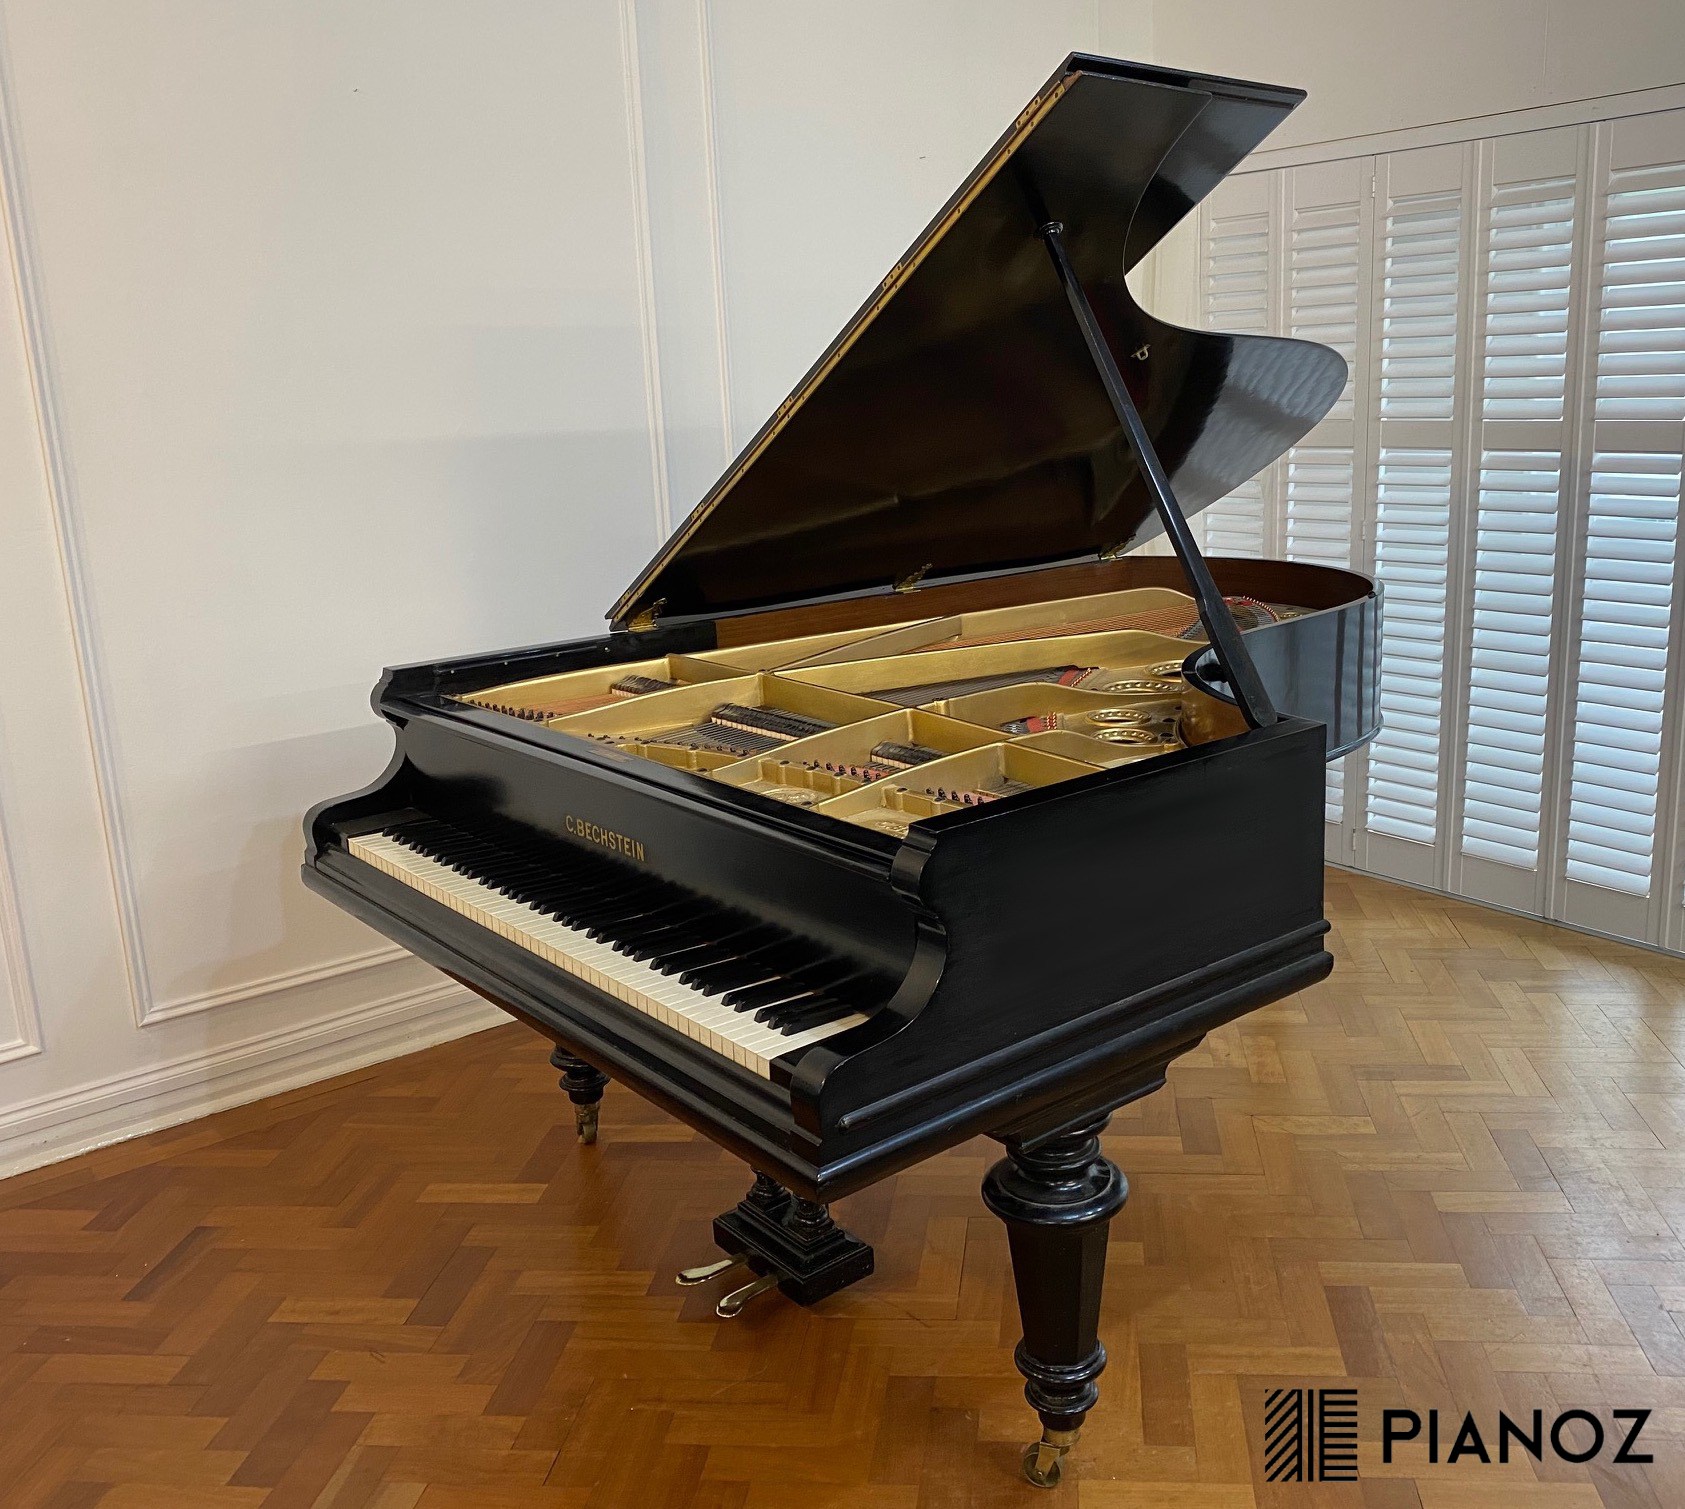 C. Bechstein Model C Grand Piano piano for sale in UK